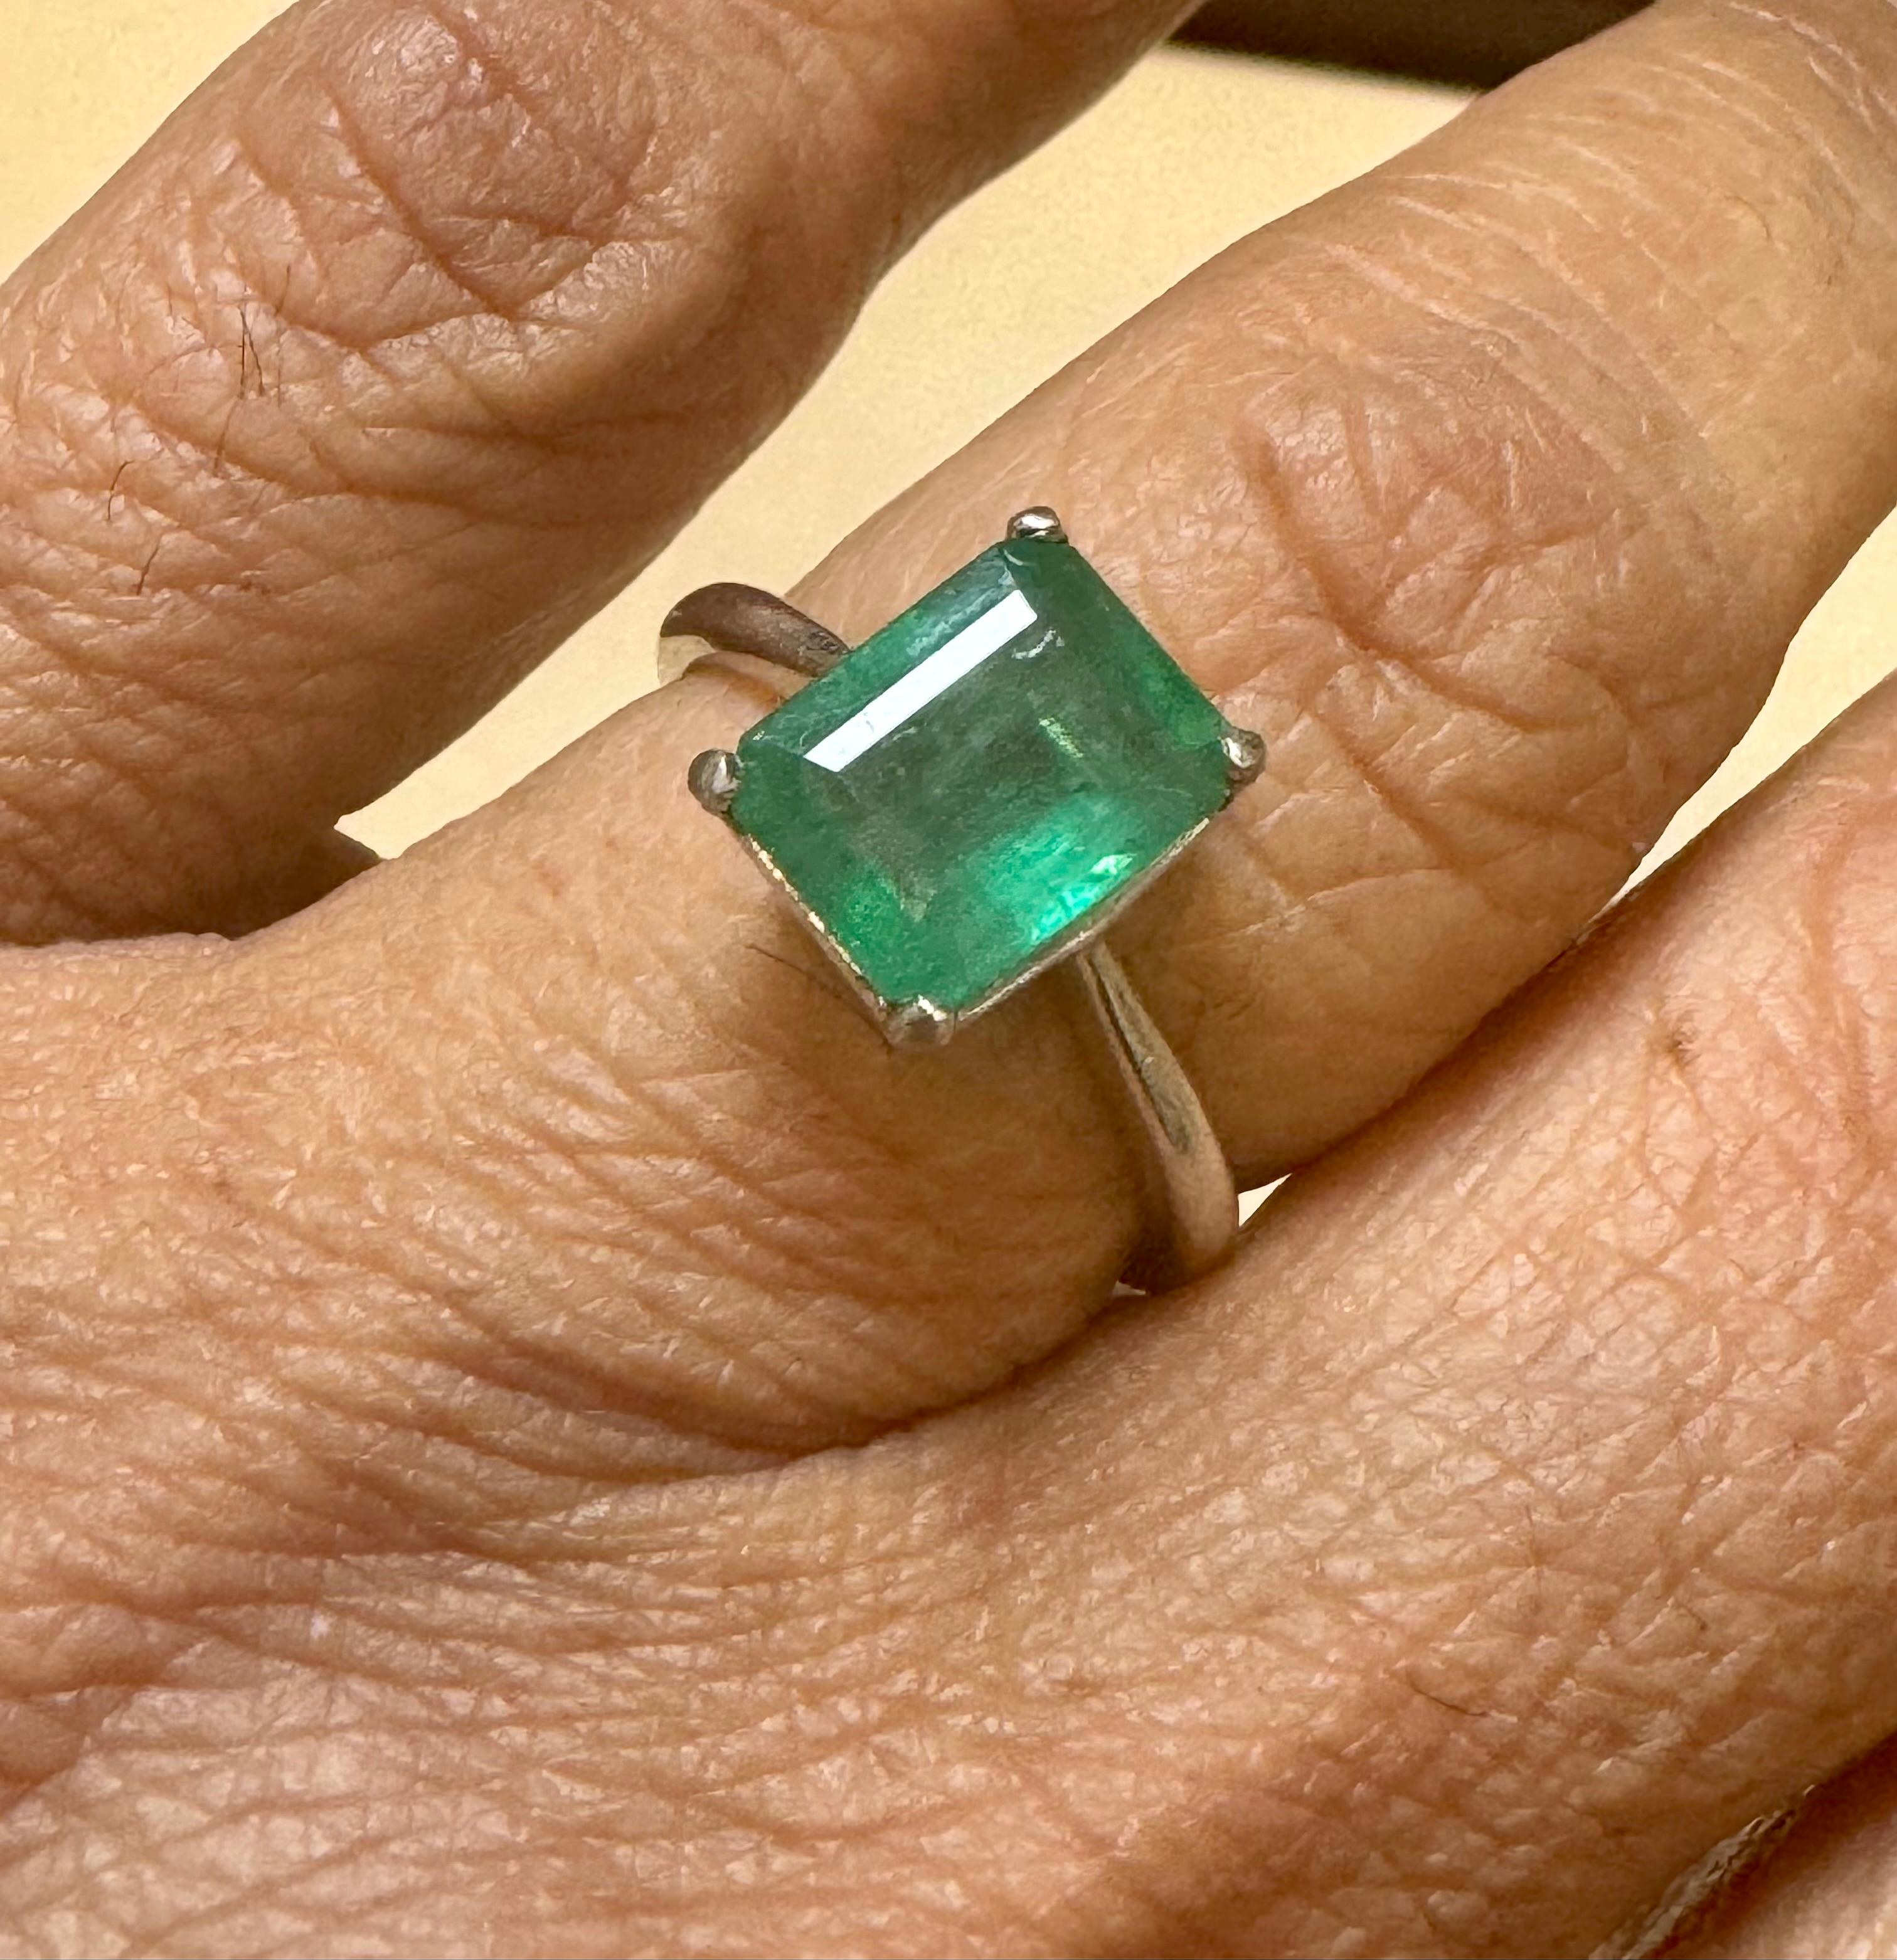 Natural 2.2 Carat Emerald Cut Zambian Emerald Ring in Platinum, Estate, Size 5.5
A classic design  ring , Ring Size 5.5 , Very affordable
Approximately 2.2 Carat  Emerald Cut Emerald Absolutely gorgeous emerald , Very desirable color .
Origin